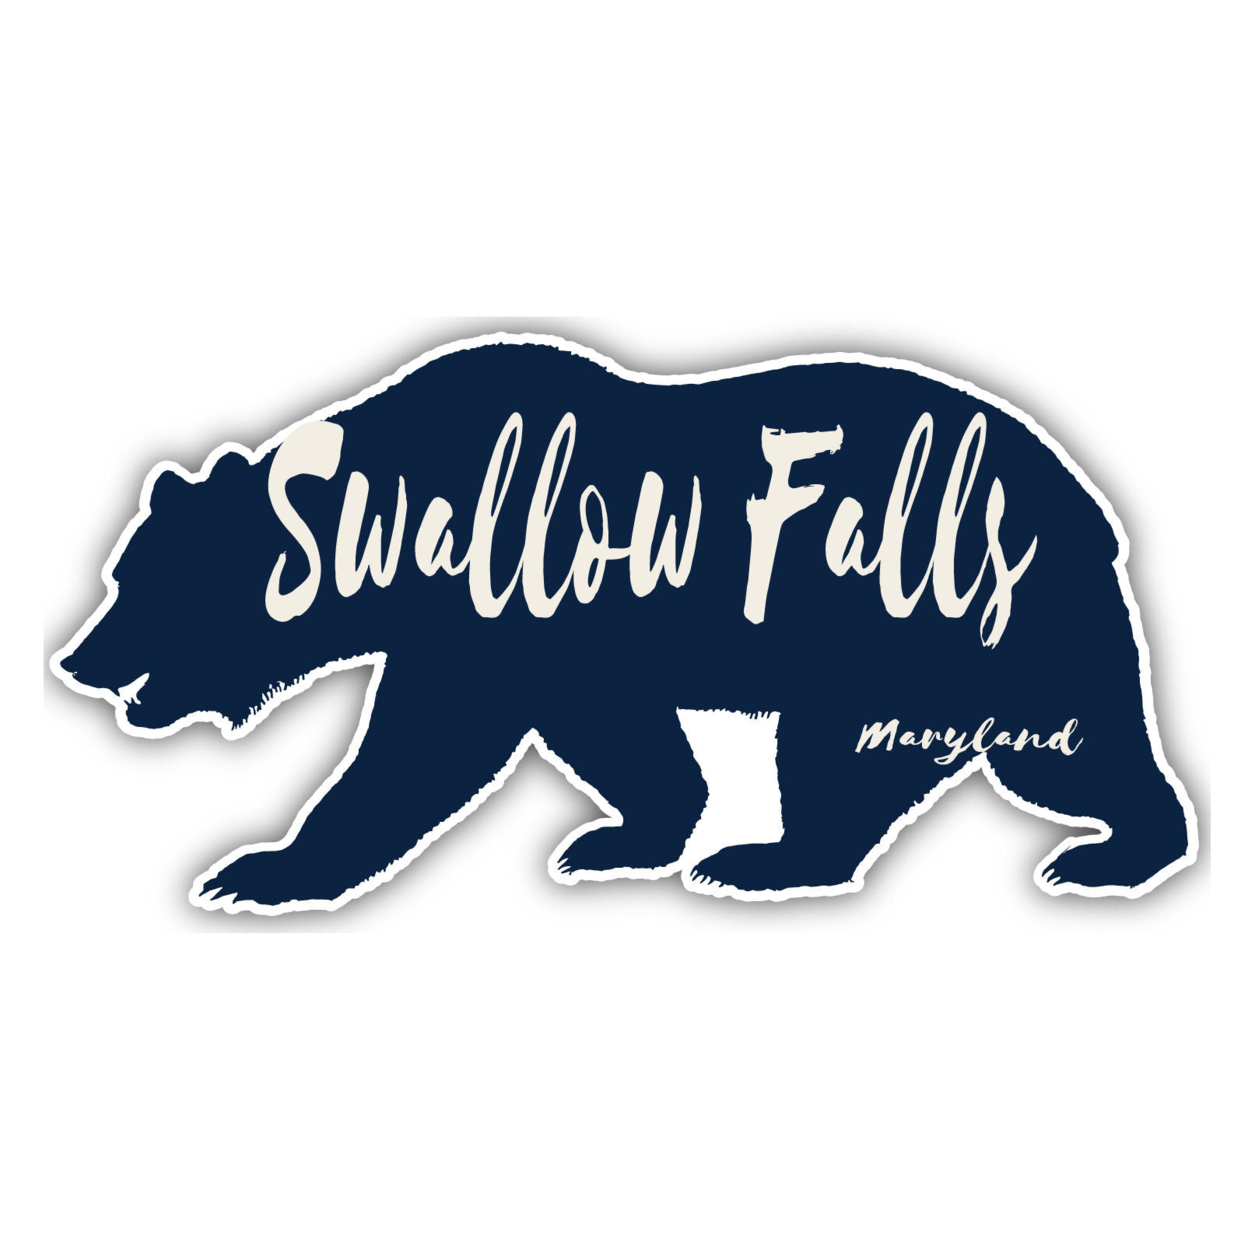 Swallow Falls Maryland Souvenir Decorative Stickers (Choose Theme And Size) - Single Unit, 2-Inch, Bear